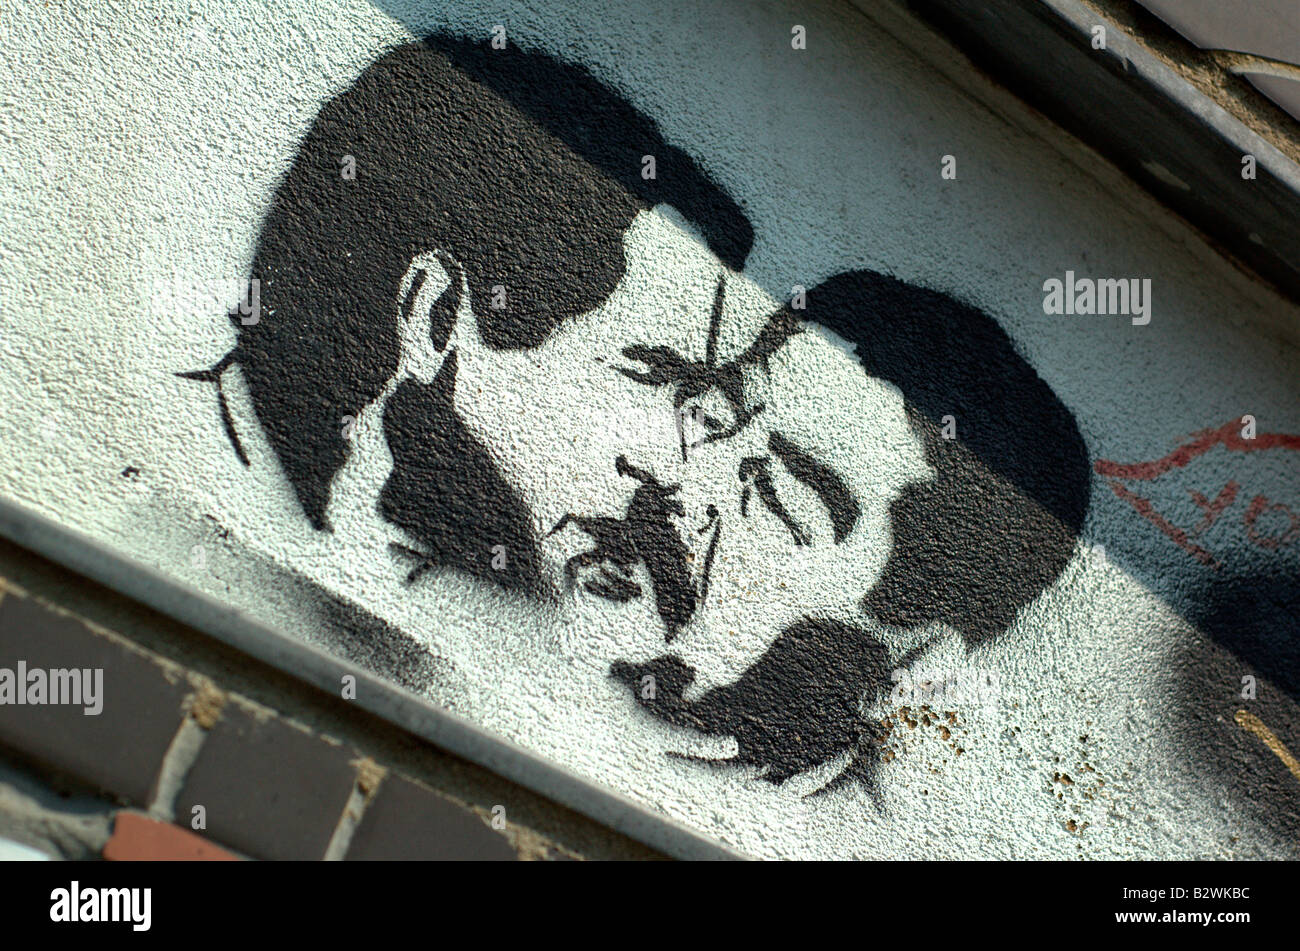 Humorous graffiti depicting George W. Bush and Saddam Hussein sharing a kiss, found on ethnically diverse Brick Lane in London. Stock Photo